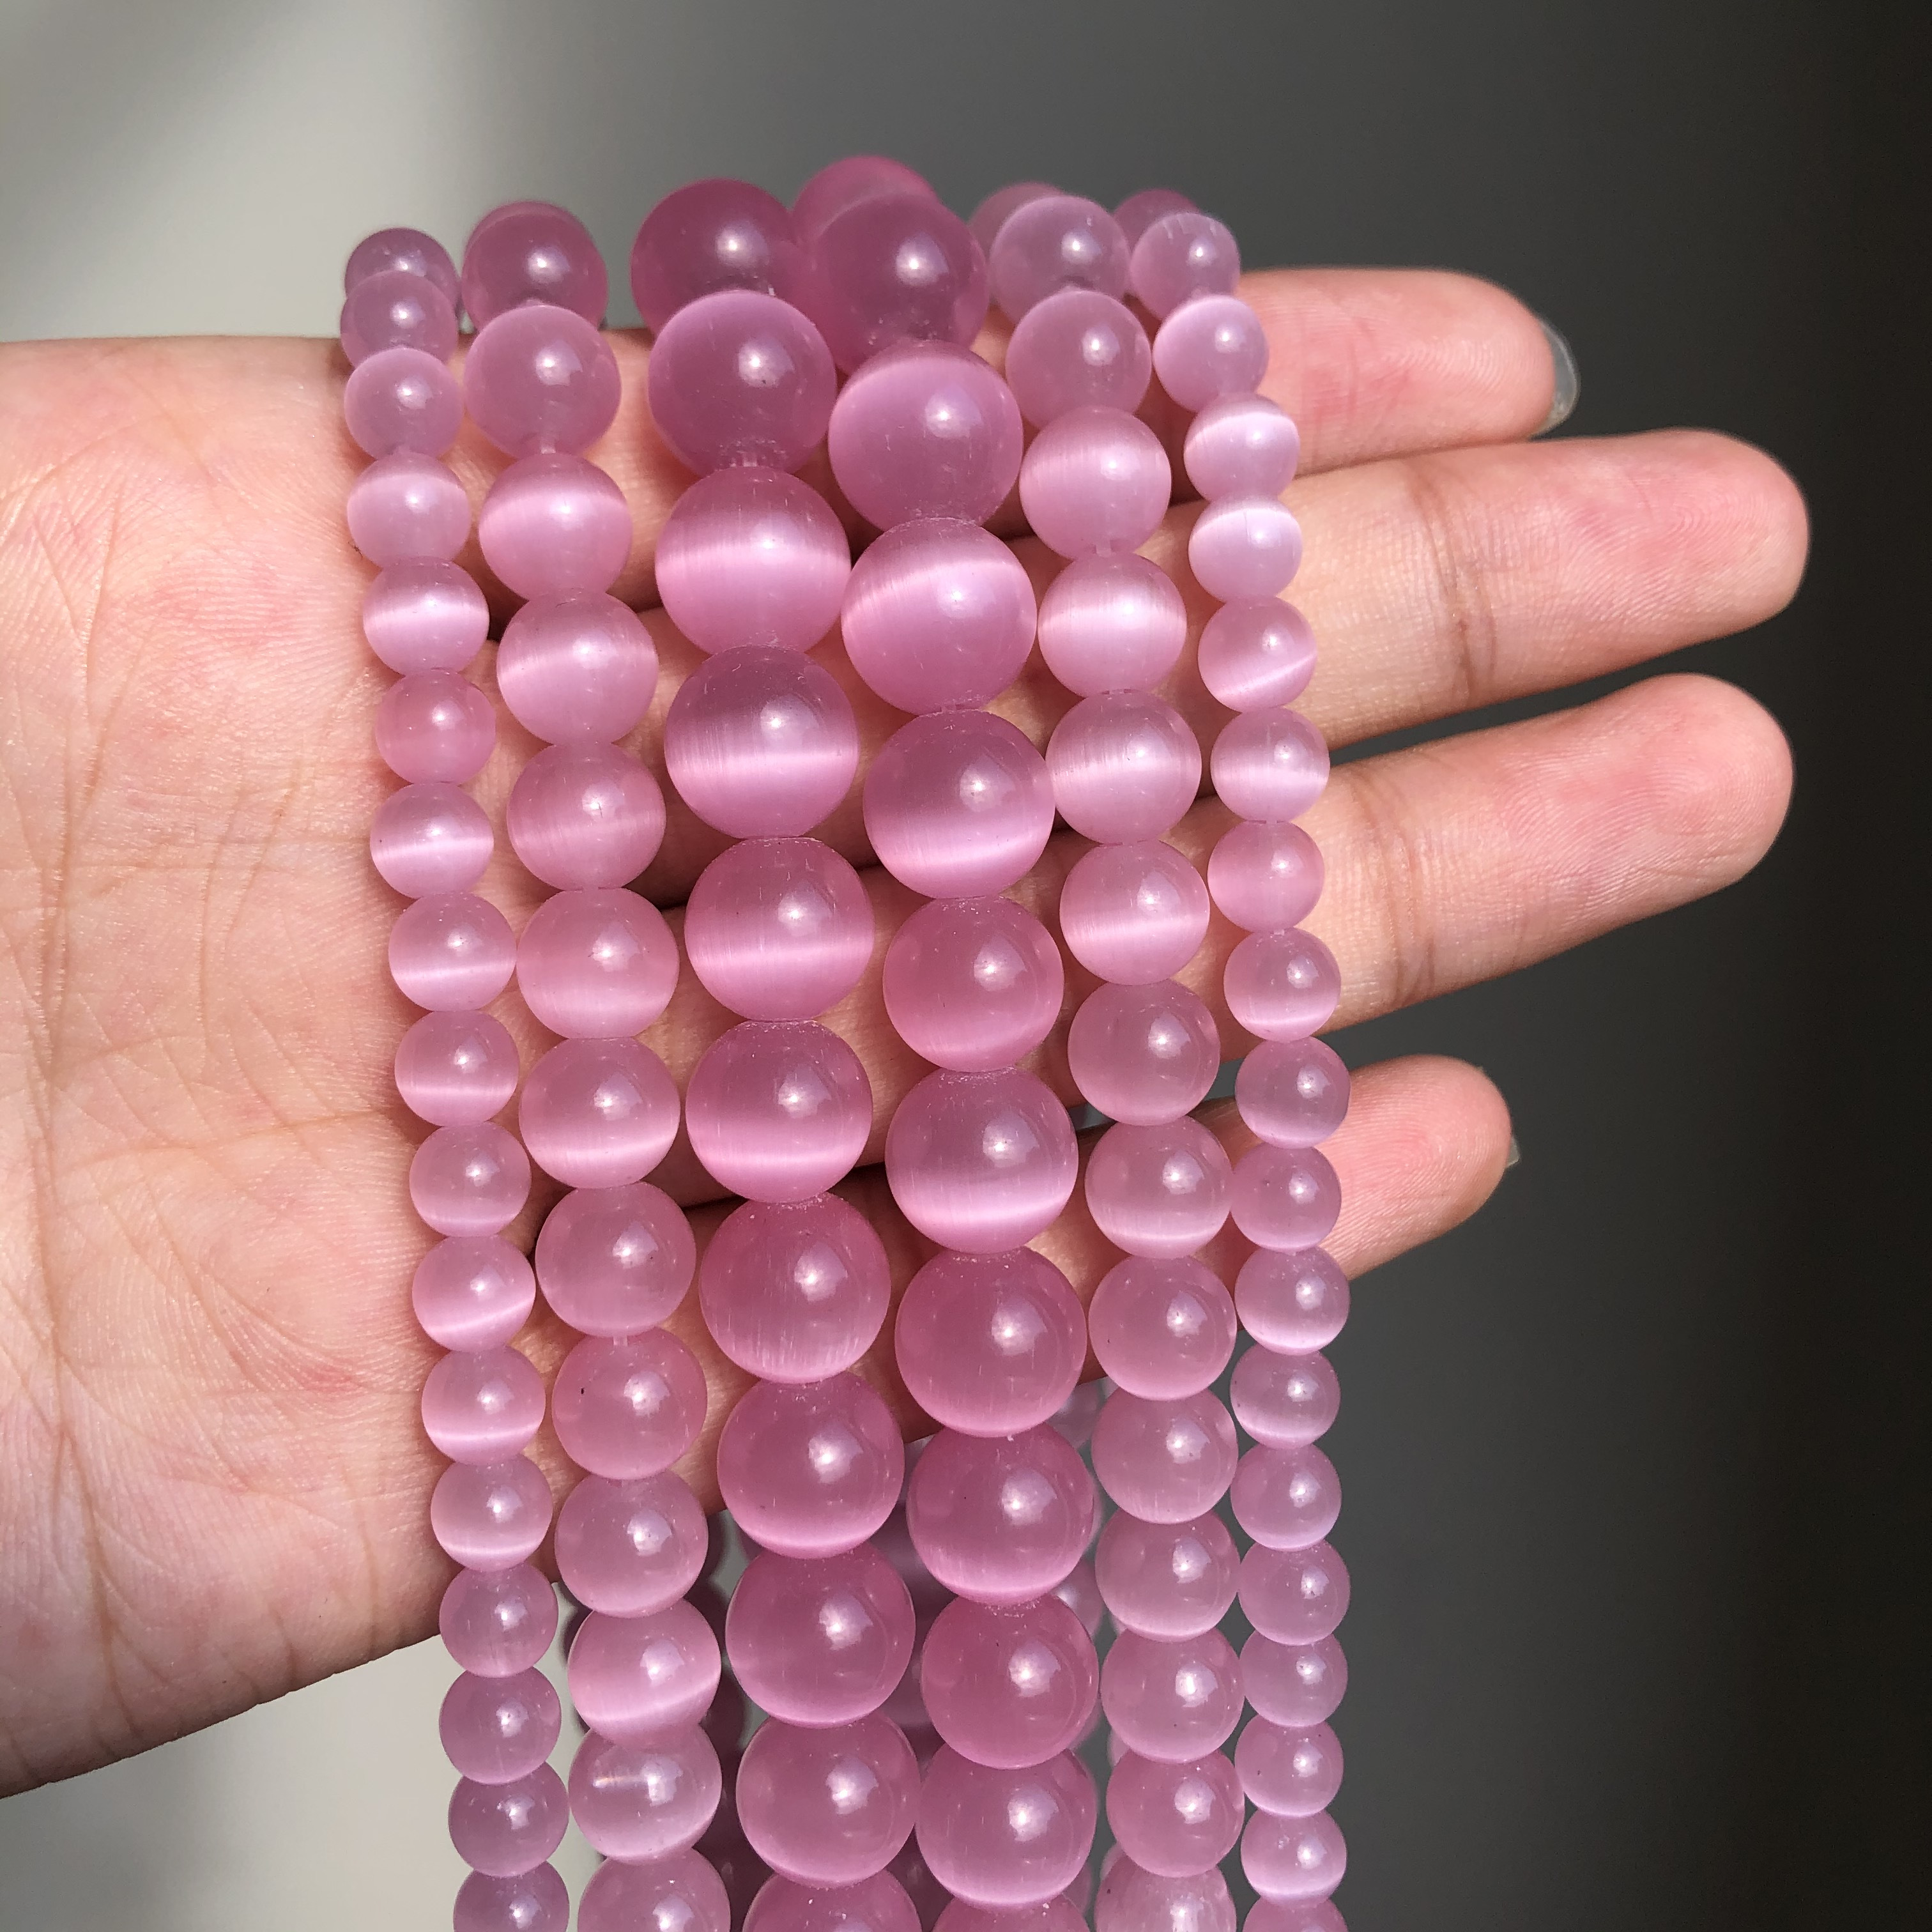 4-12mm Natural Pink White Blue Cat Eye Beads Hight Quality Round Loose  Beads For Jewelry Making Moon Stone DIY Bracelet 15inches